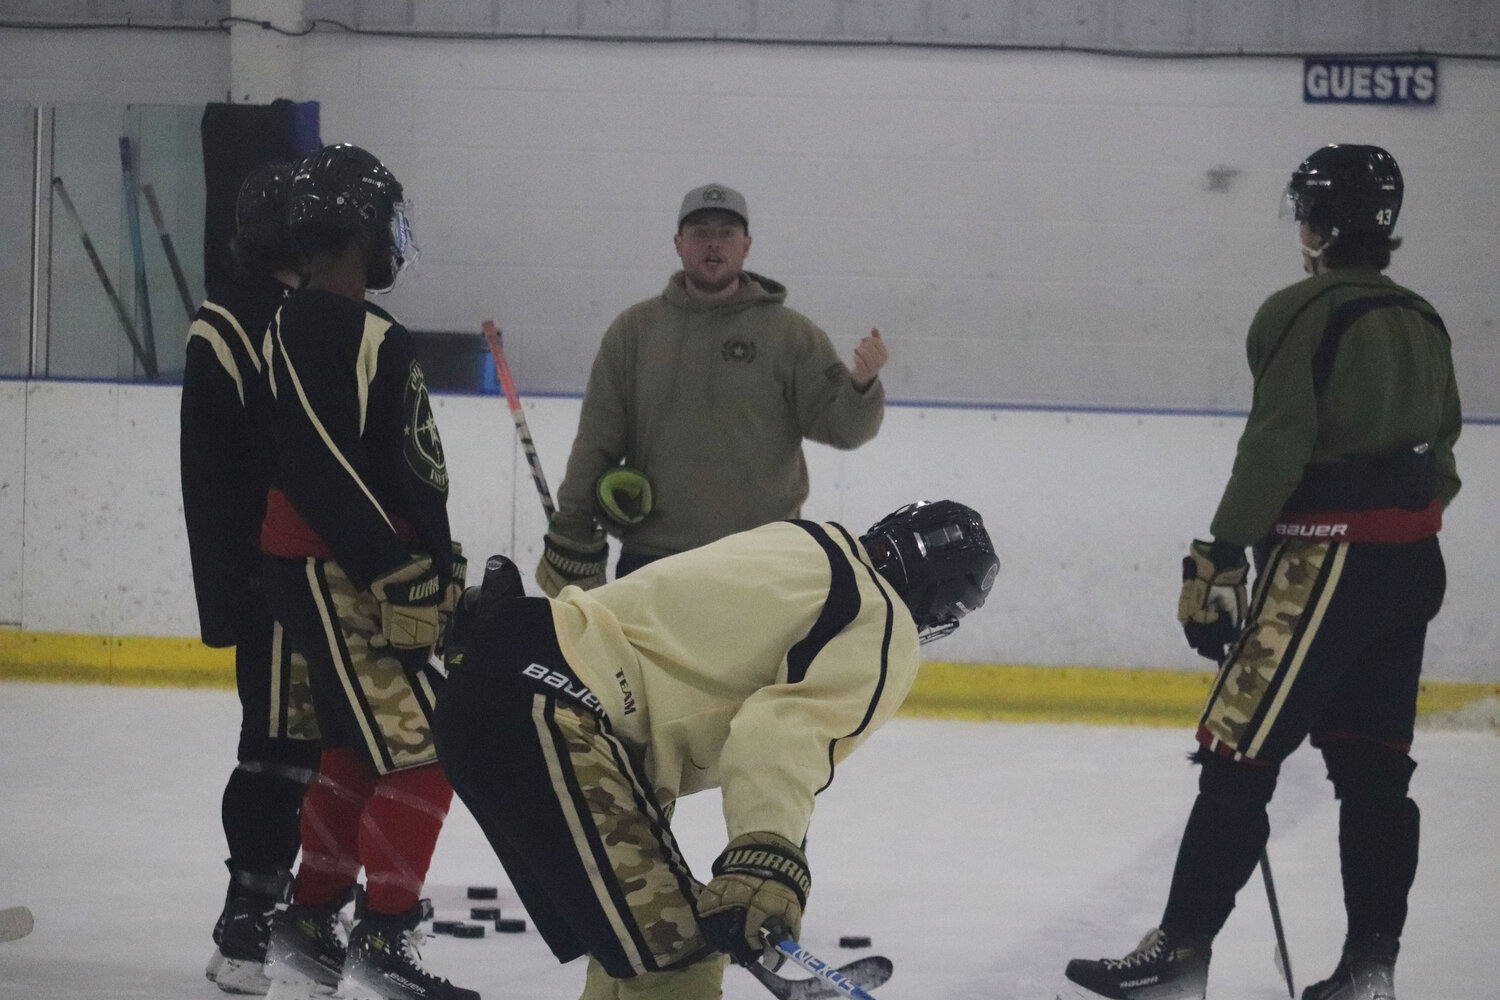 The Columbia Infantry is in its second season and looking to expand hockey culture in the region.